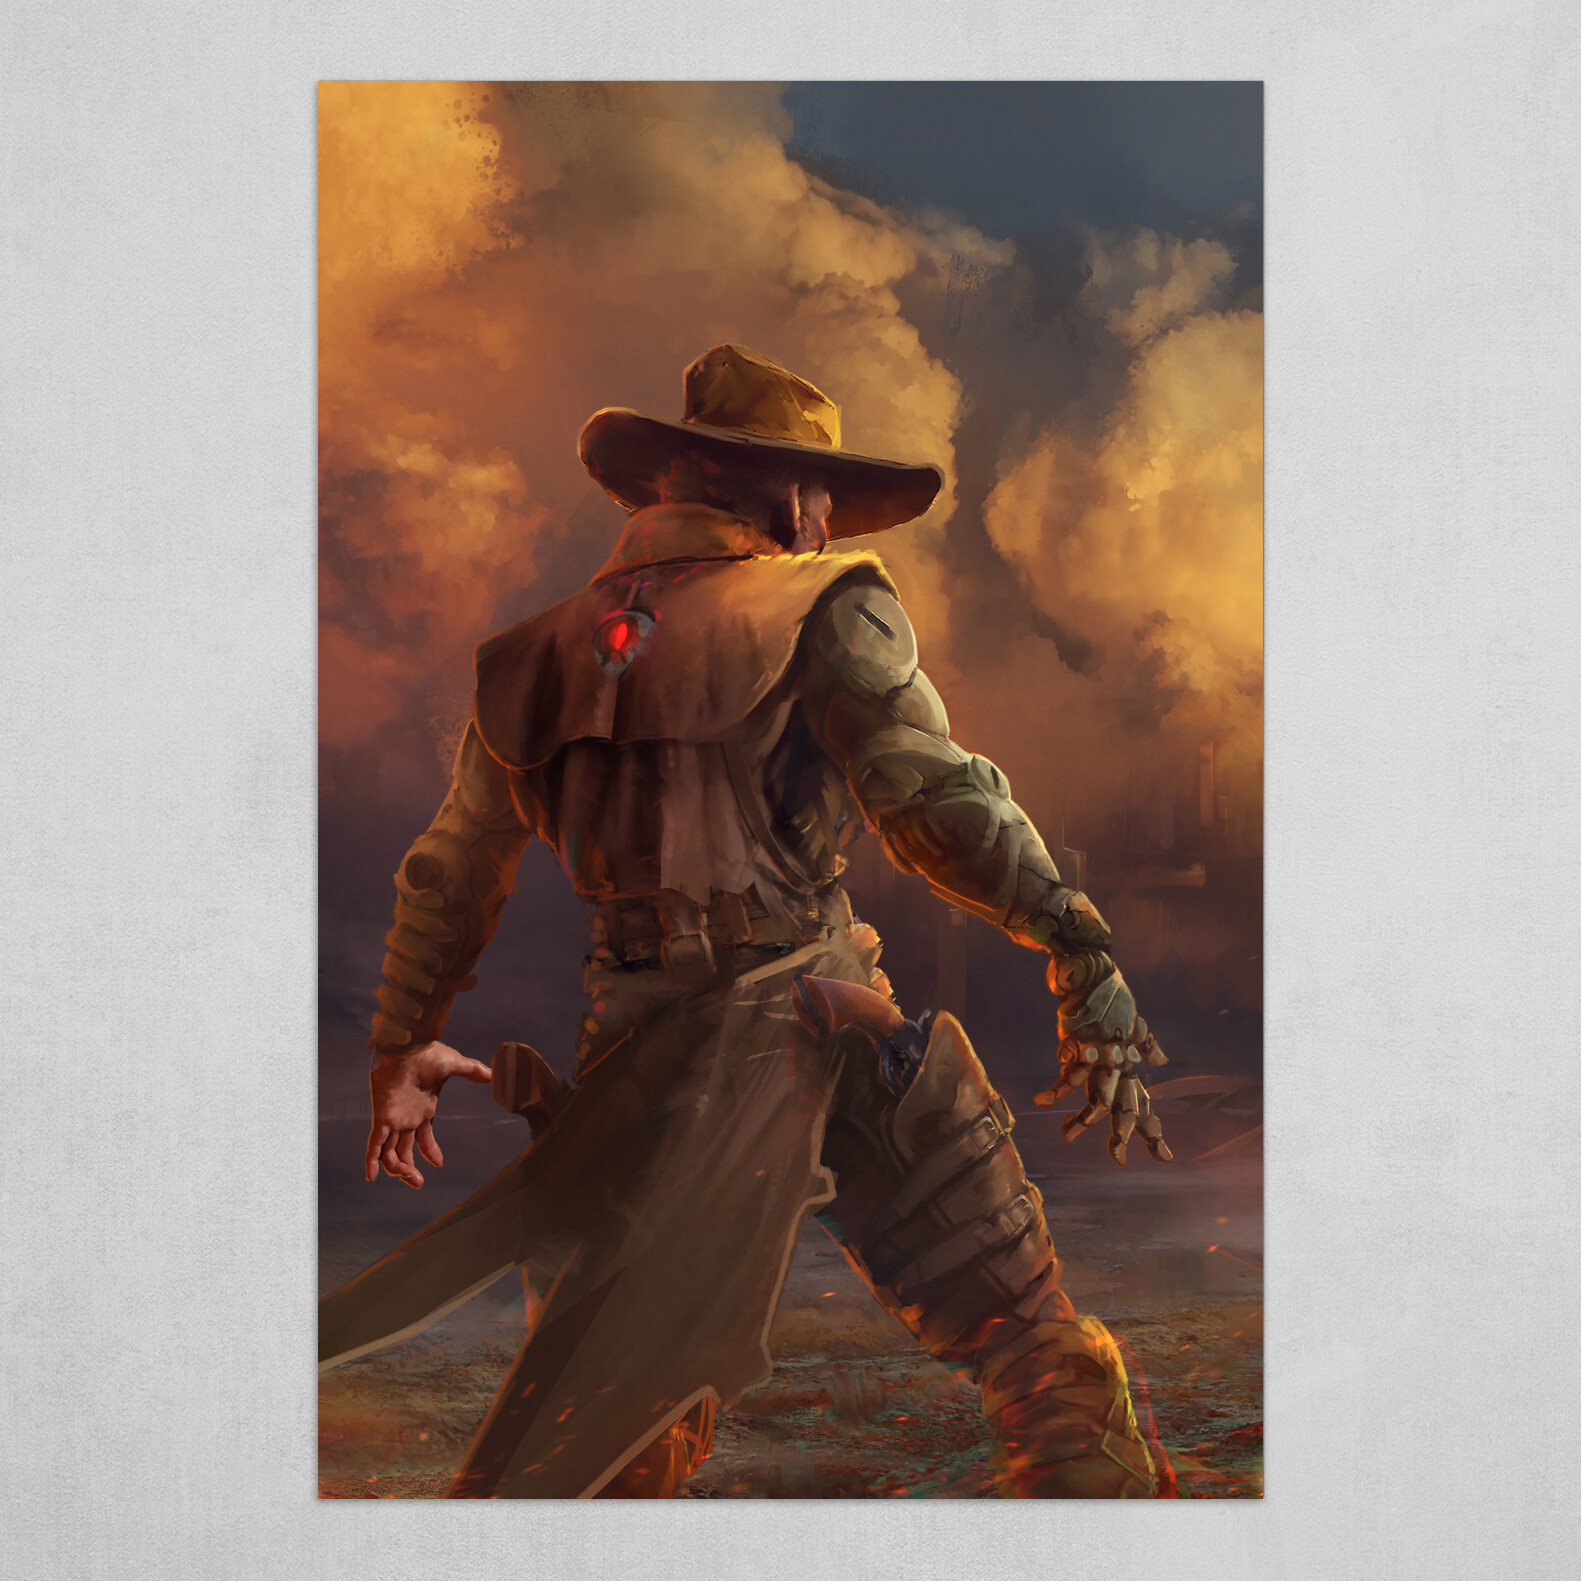 The Sheriff 4: A post-apocalyptic sci-fi western cover art